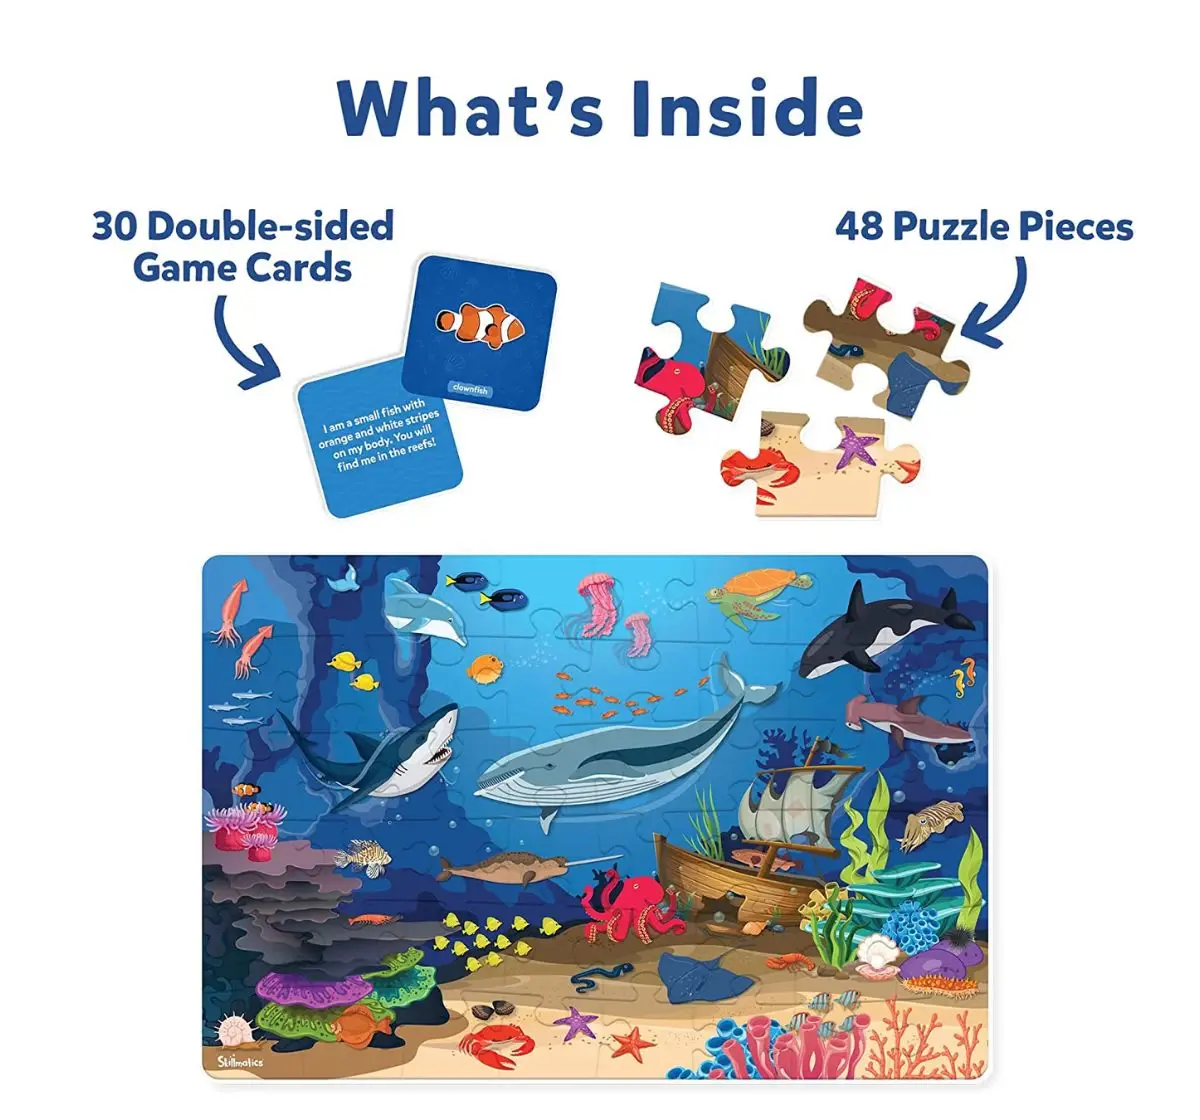 Skillmatics Floor Puzzle & Game - Piece & Play Underwater Animals, Jigsaw Puzzle, Kids for 3Y+, Multicolour